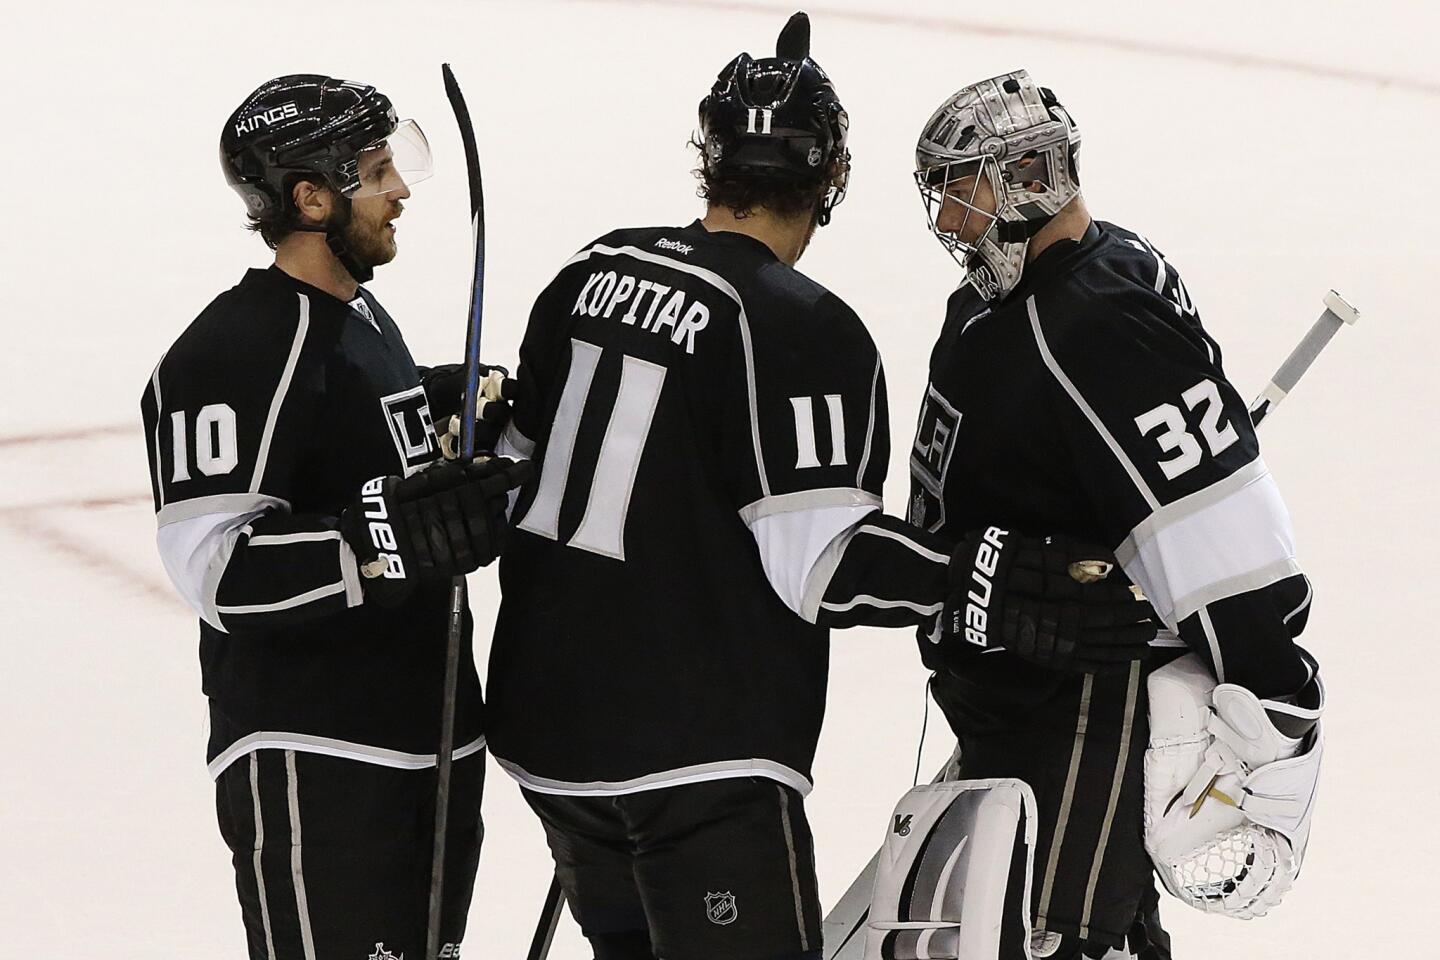 Kings goalie Jonathan Quick celebrates a 2-1 victory over the Ducks with teammates Anze Kopitar and Mike Richards on Wednesday night at Staples Center.